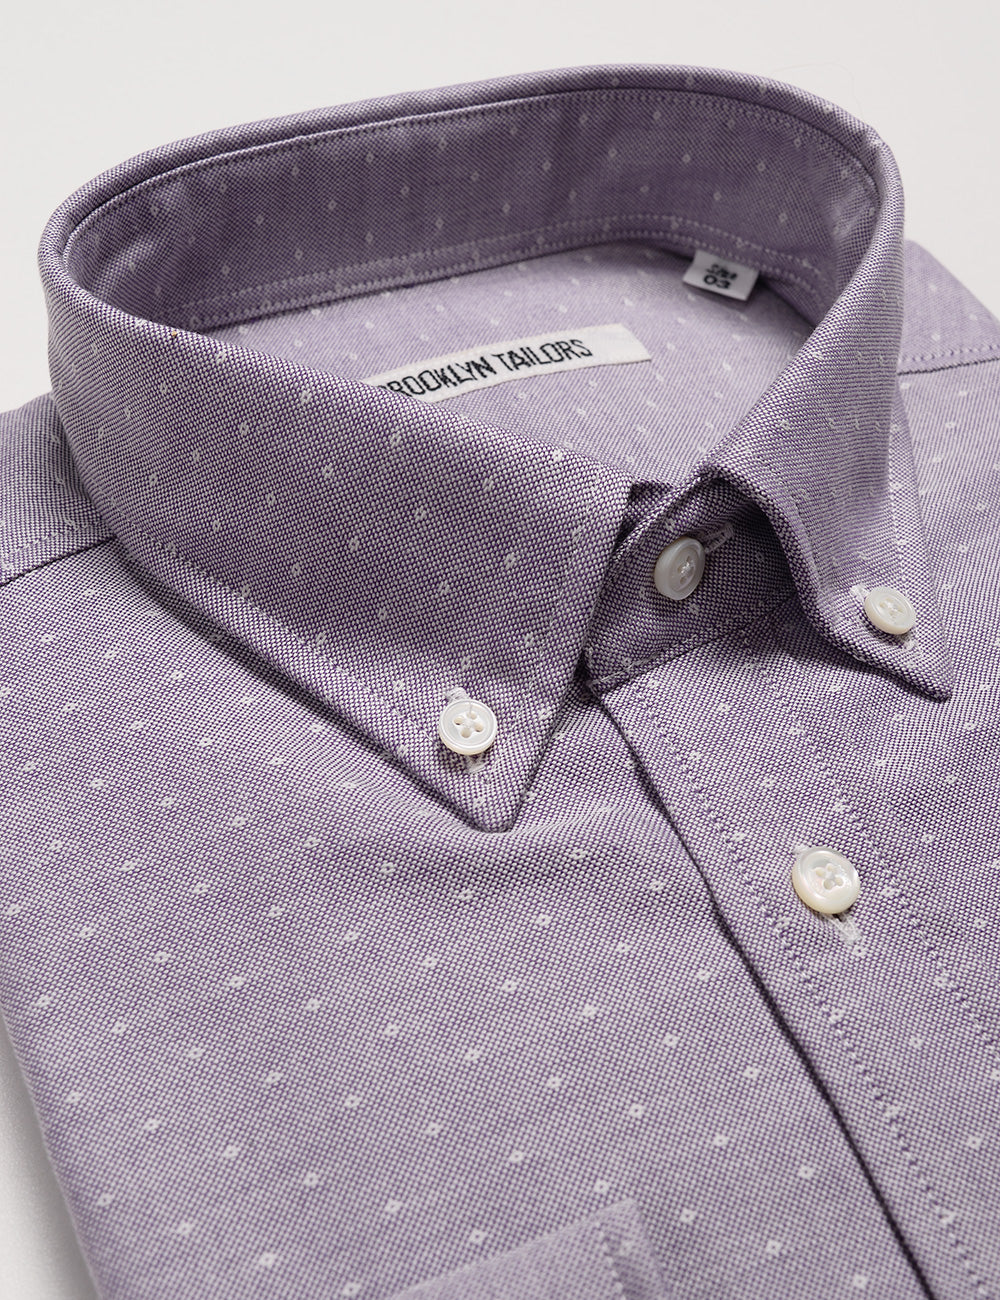 Detail of button down collar Brooklyn Tailors BKT10 Slim Casual Shirt in Eyelet Oxford - Lavender